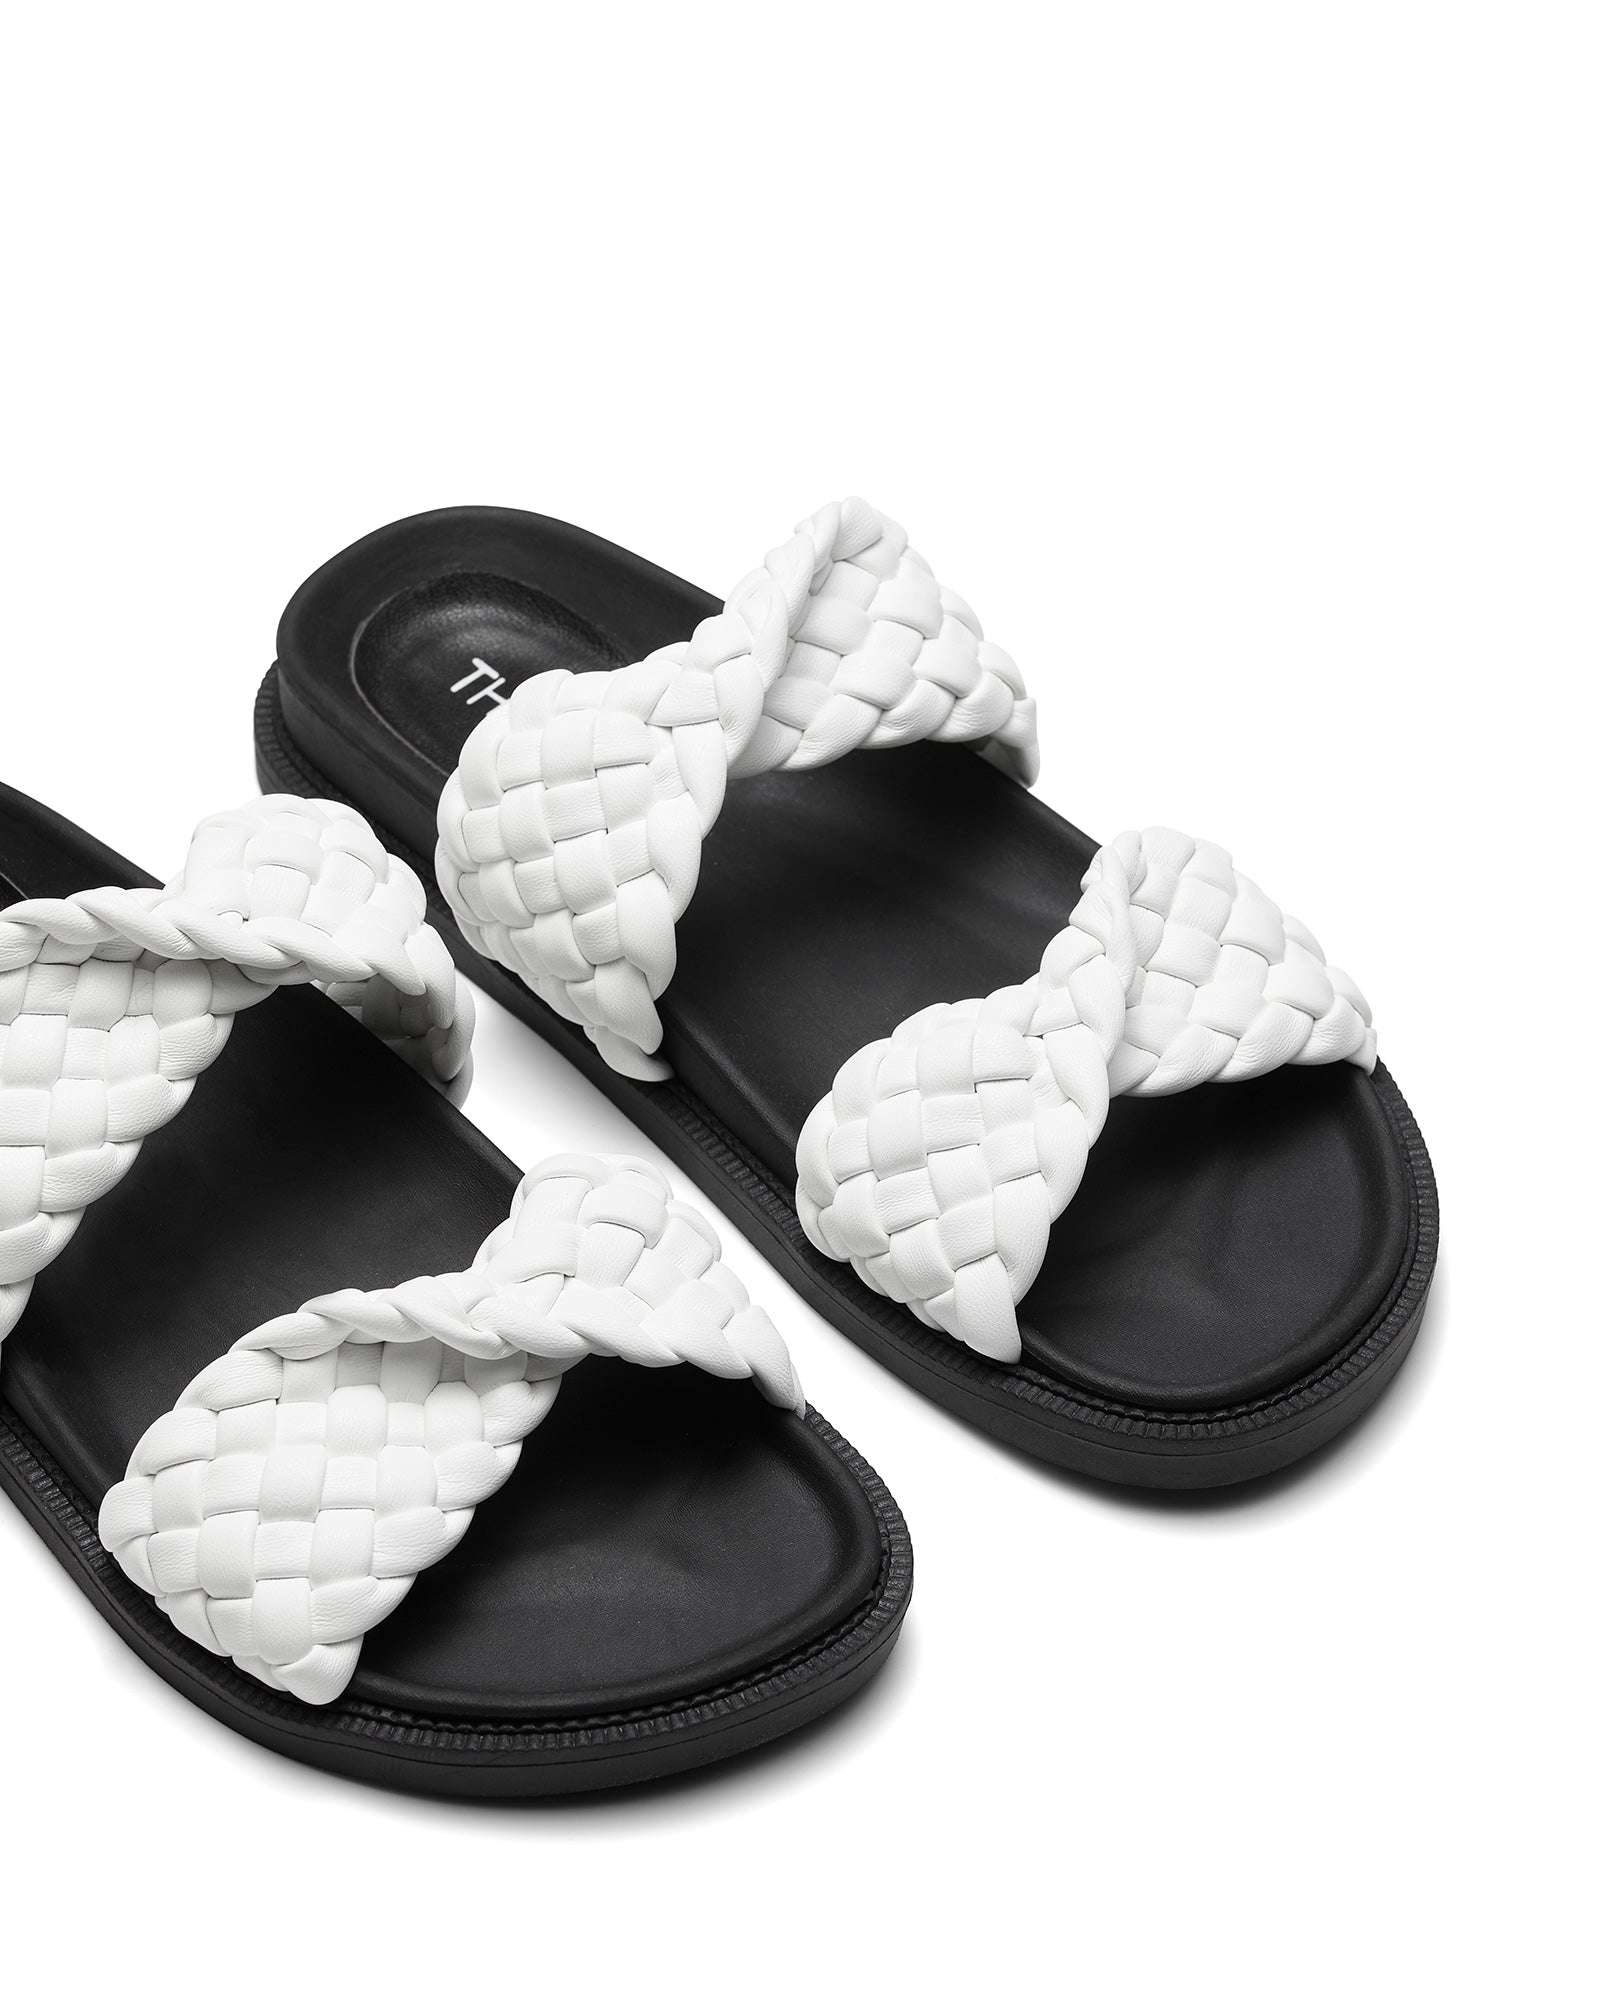 Therapy Shoes Evil White | Women's Sandals | Slides | Flats | Woven